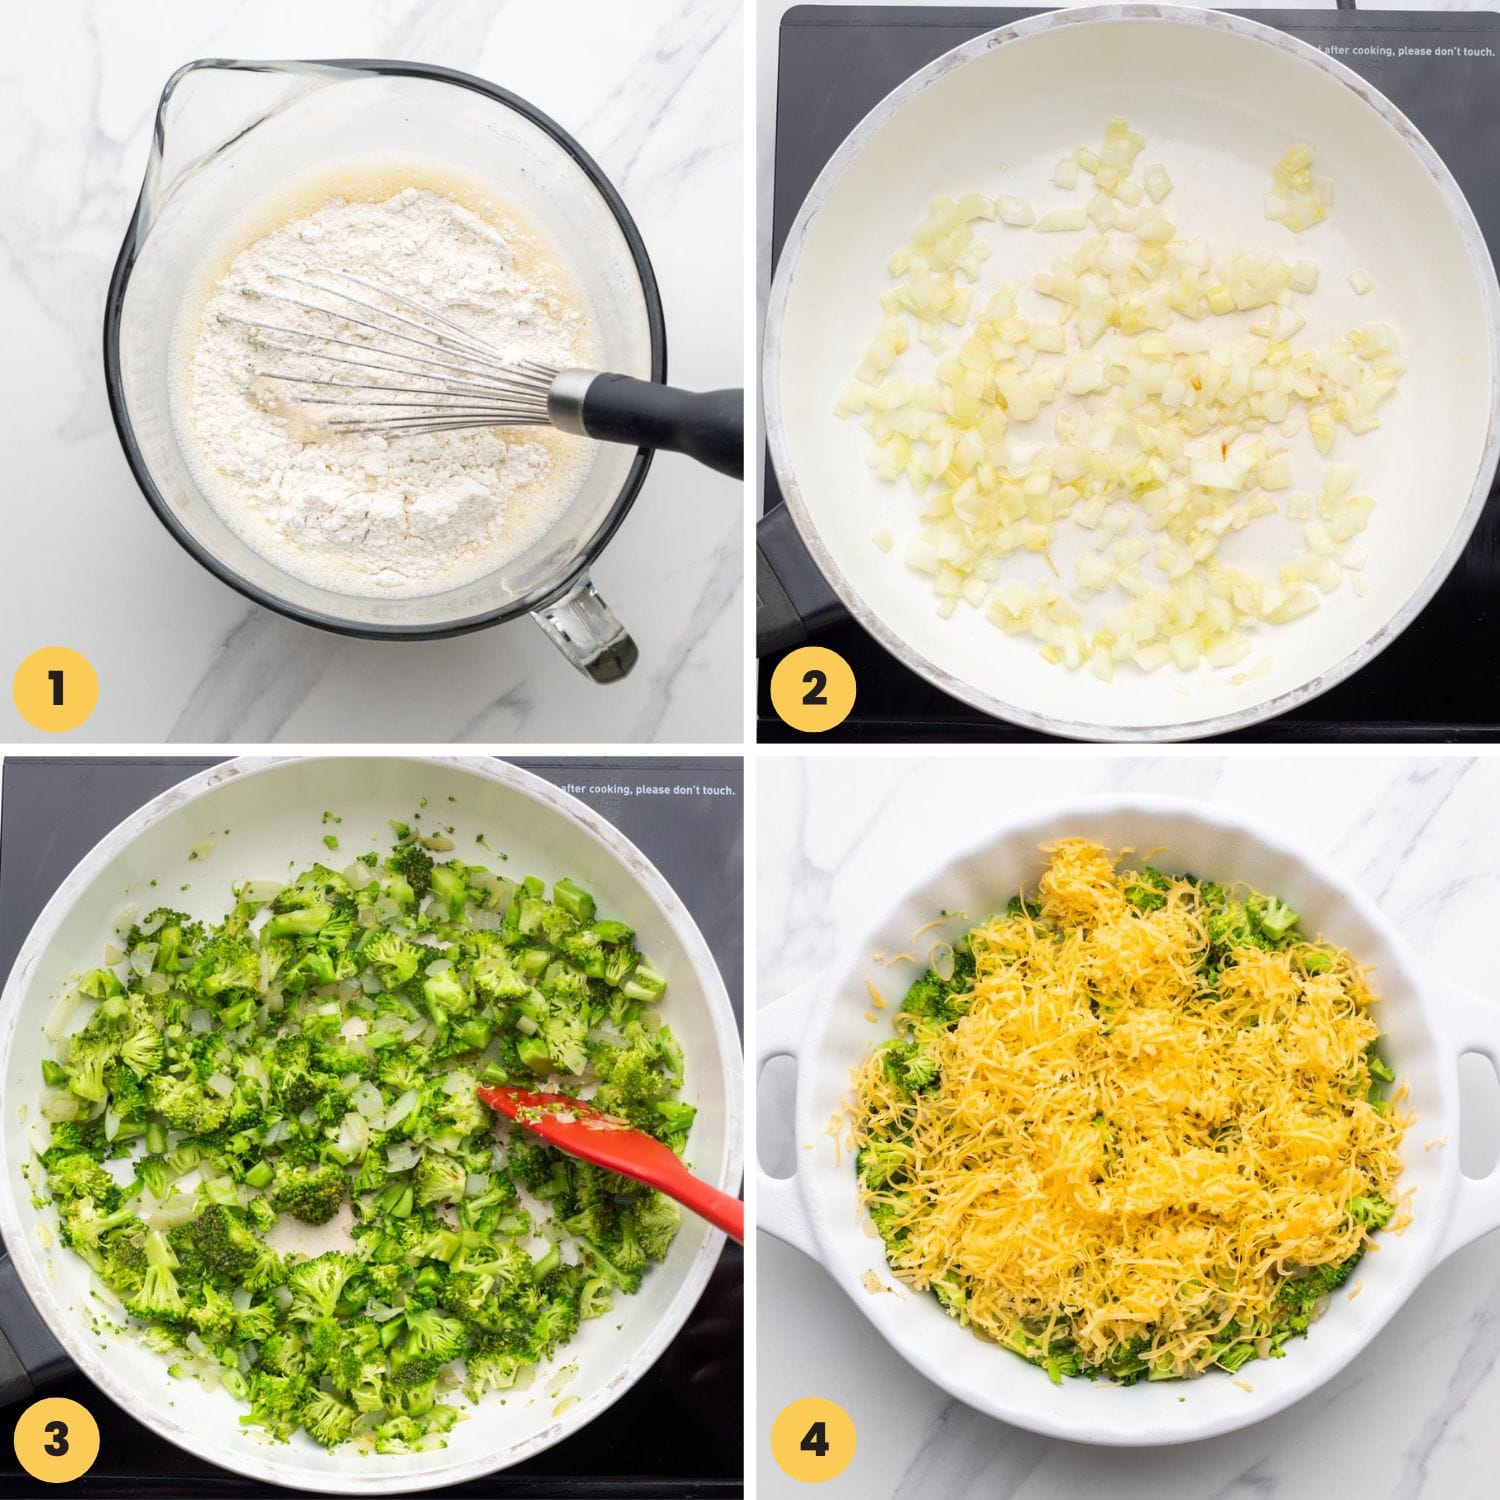 a collage of four images showing how to make a broccoli cheese quiche with bisquick.